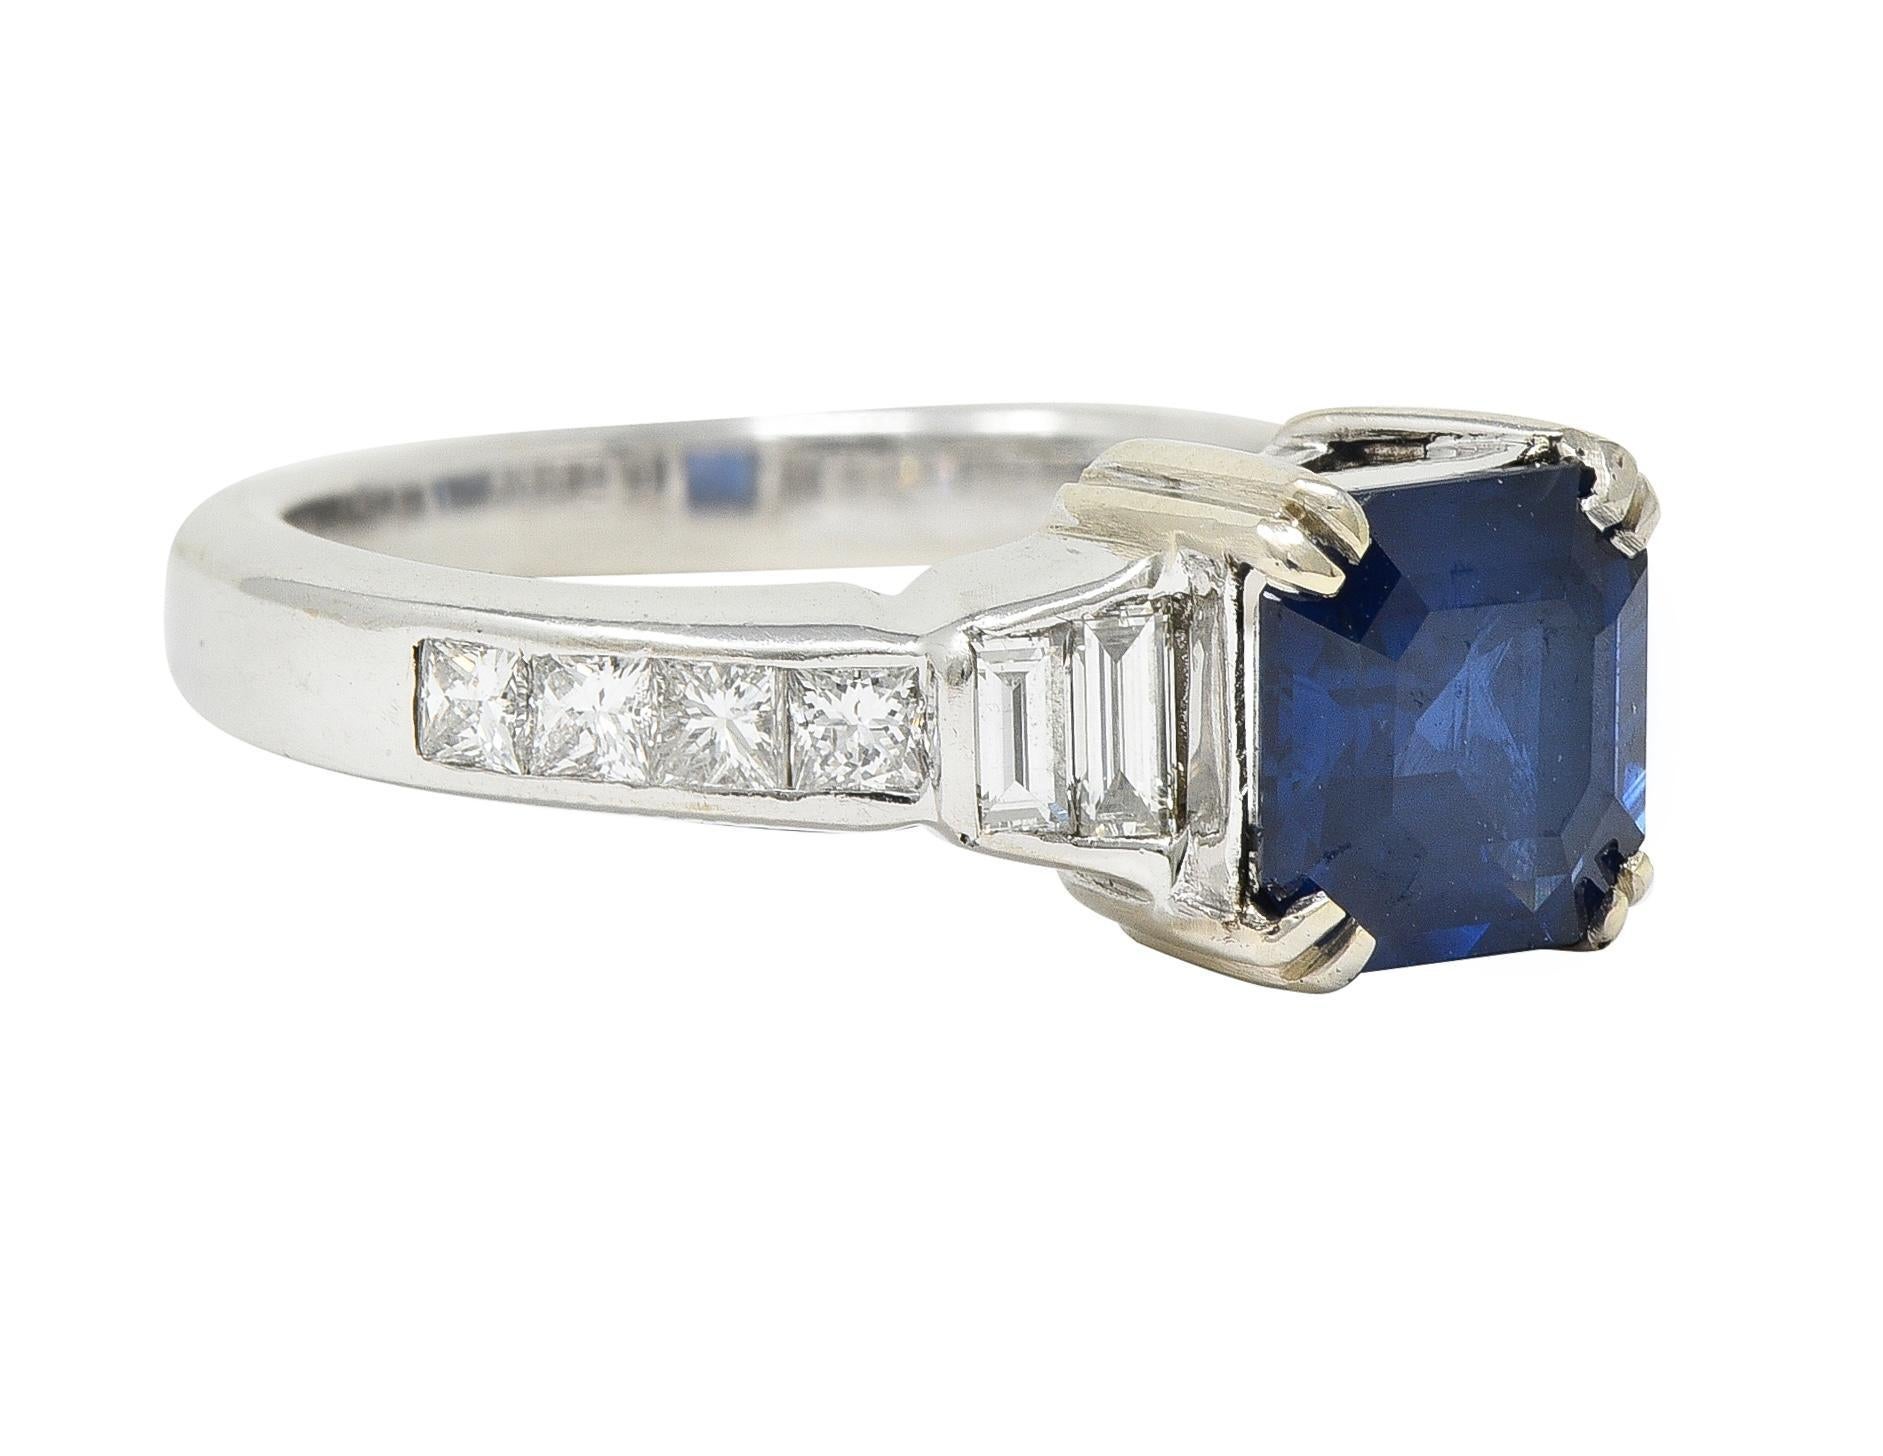 Centering an asscher cut sapphire weighing 1.95 carats total - transparent dark blue in color 
Natural Thai in origin - set with split prongs in basket and flanked by stepped shoulders
Bar set with baguette cut diamonds weighing approximately 0.36